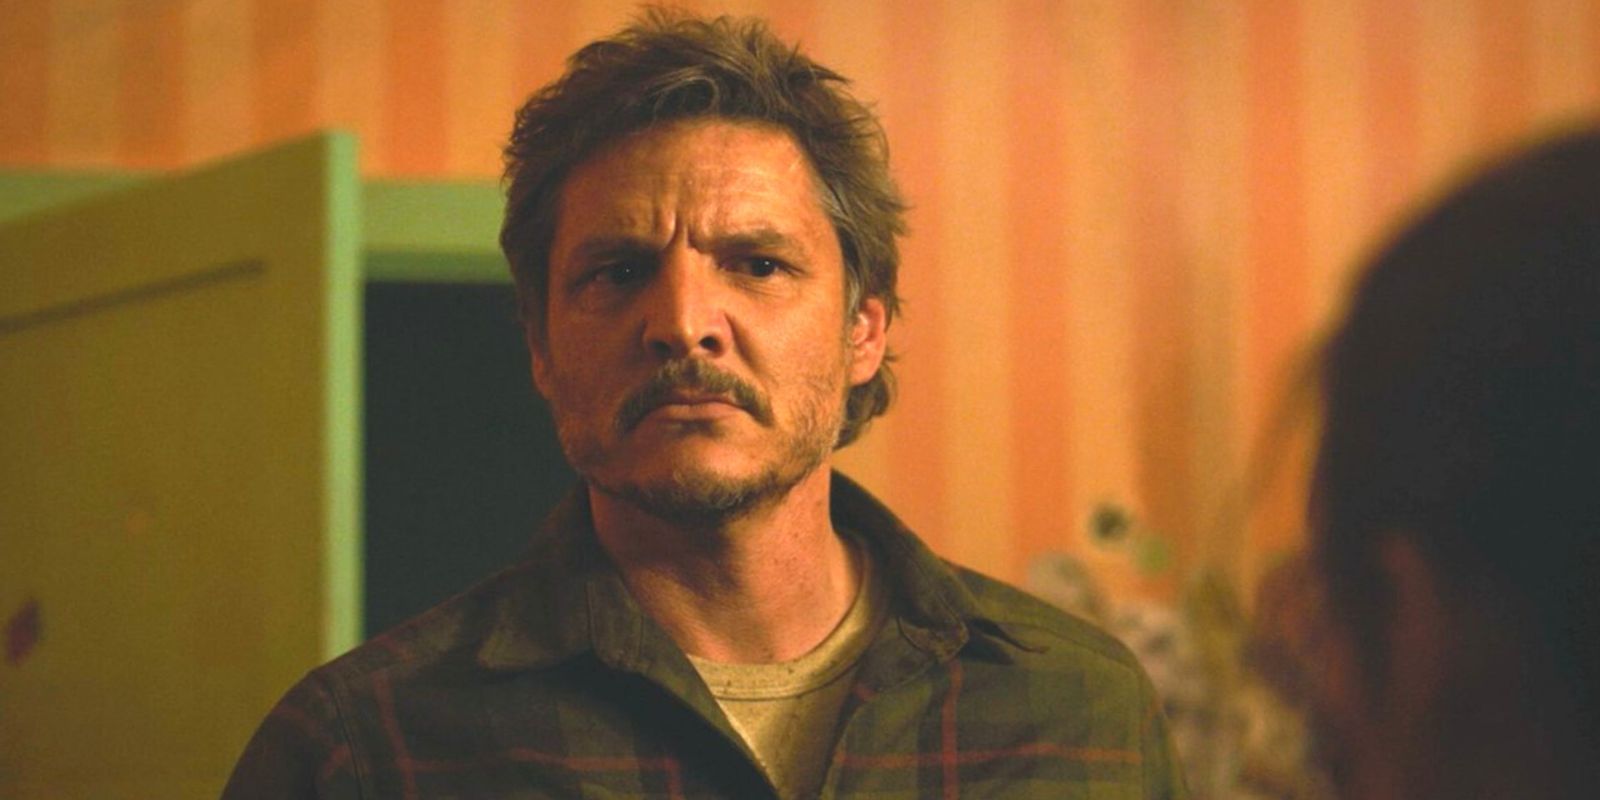 Pedro Pascal glowers as Joel in HBO's The Last of Us